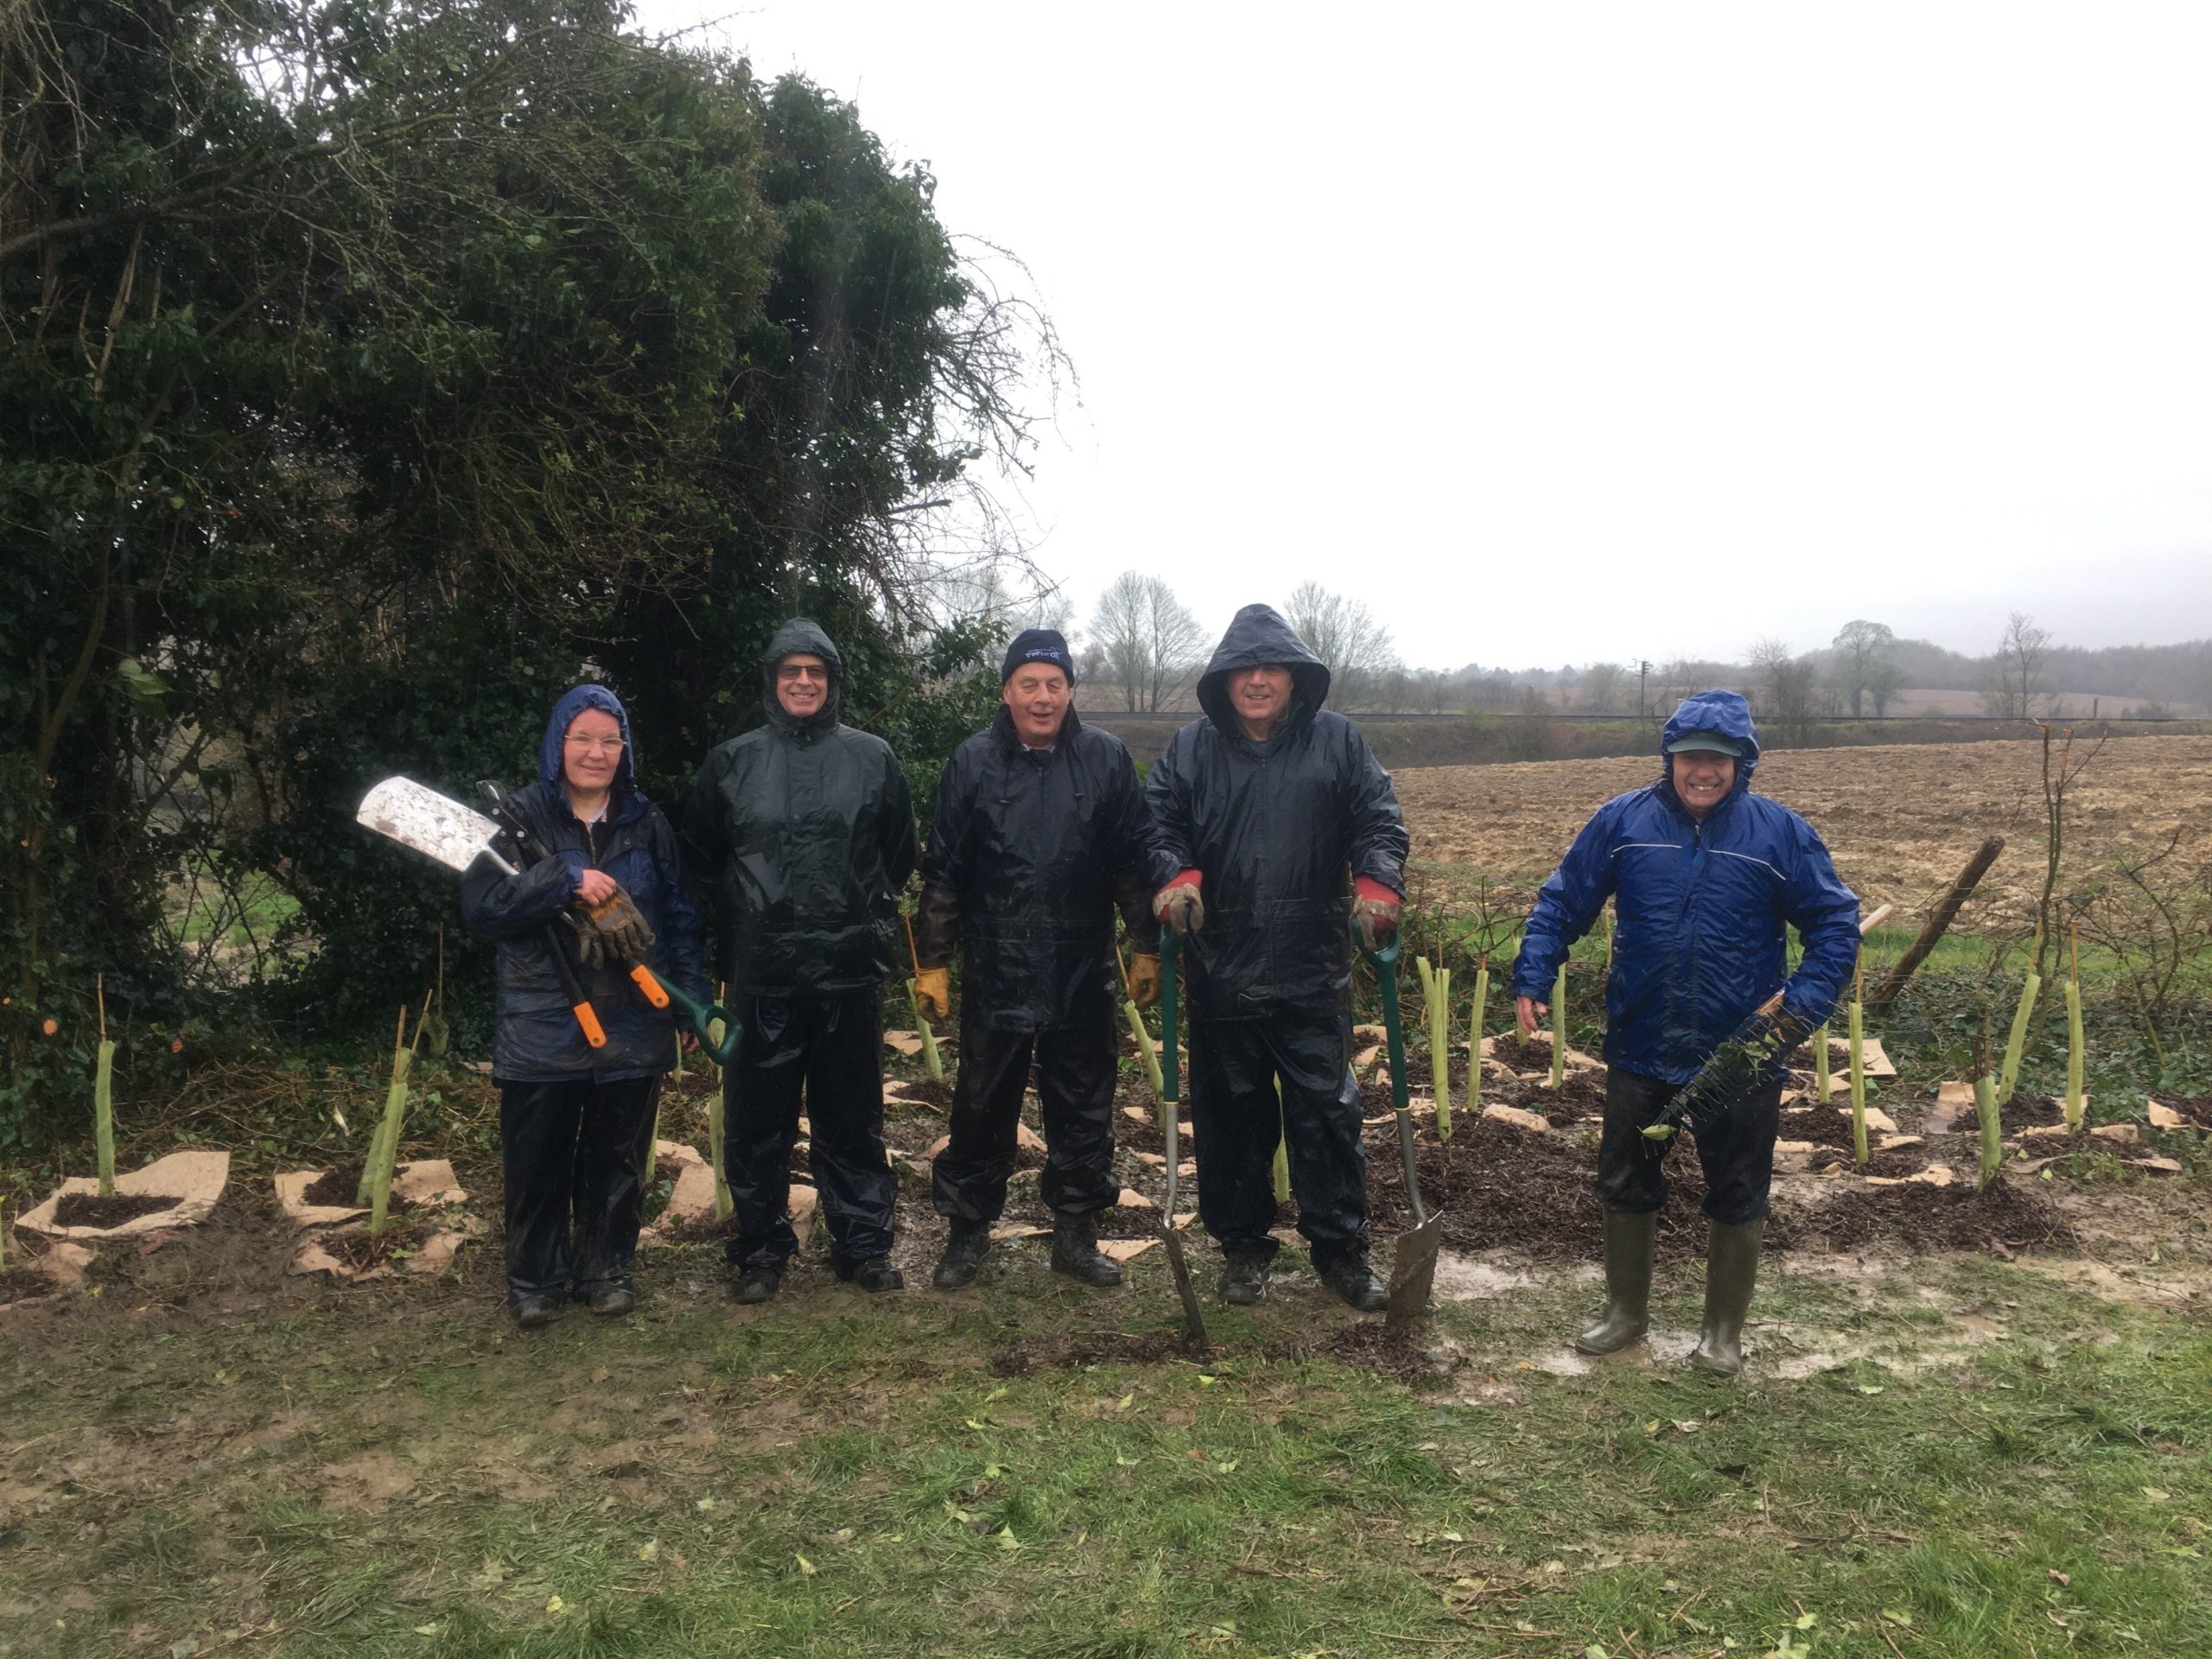 Five people dressed in wet weather clothing standing in front of a row of newly planted hedgerow